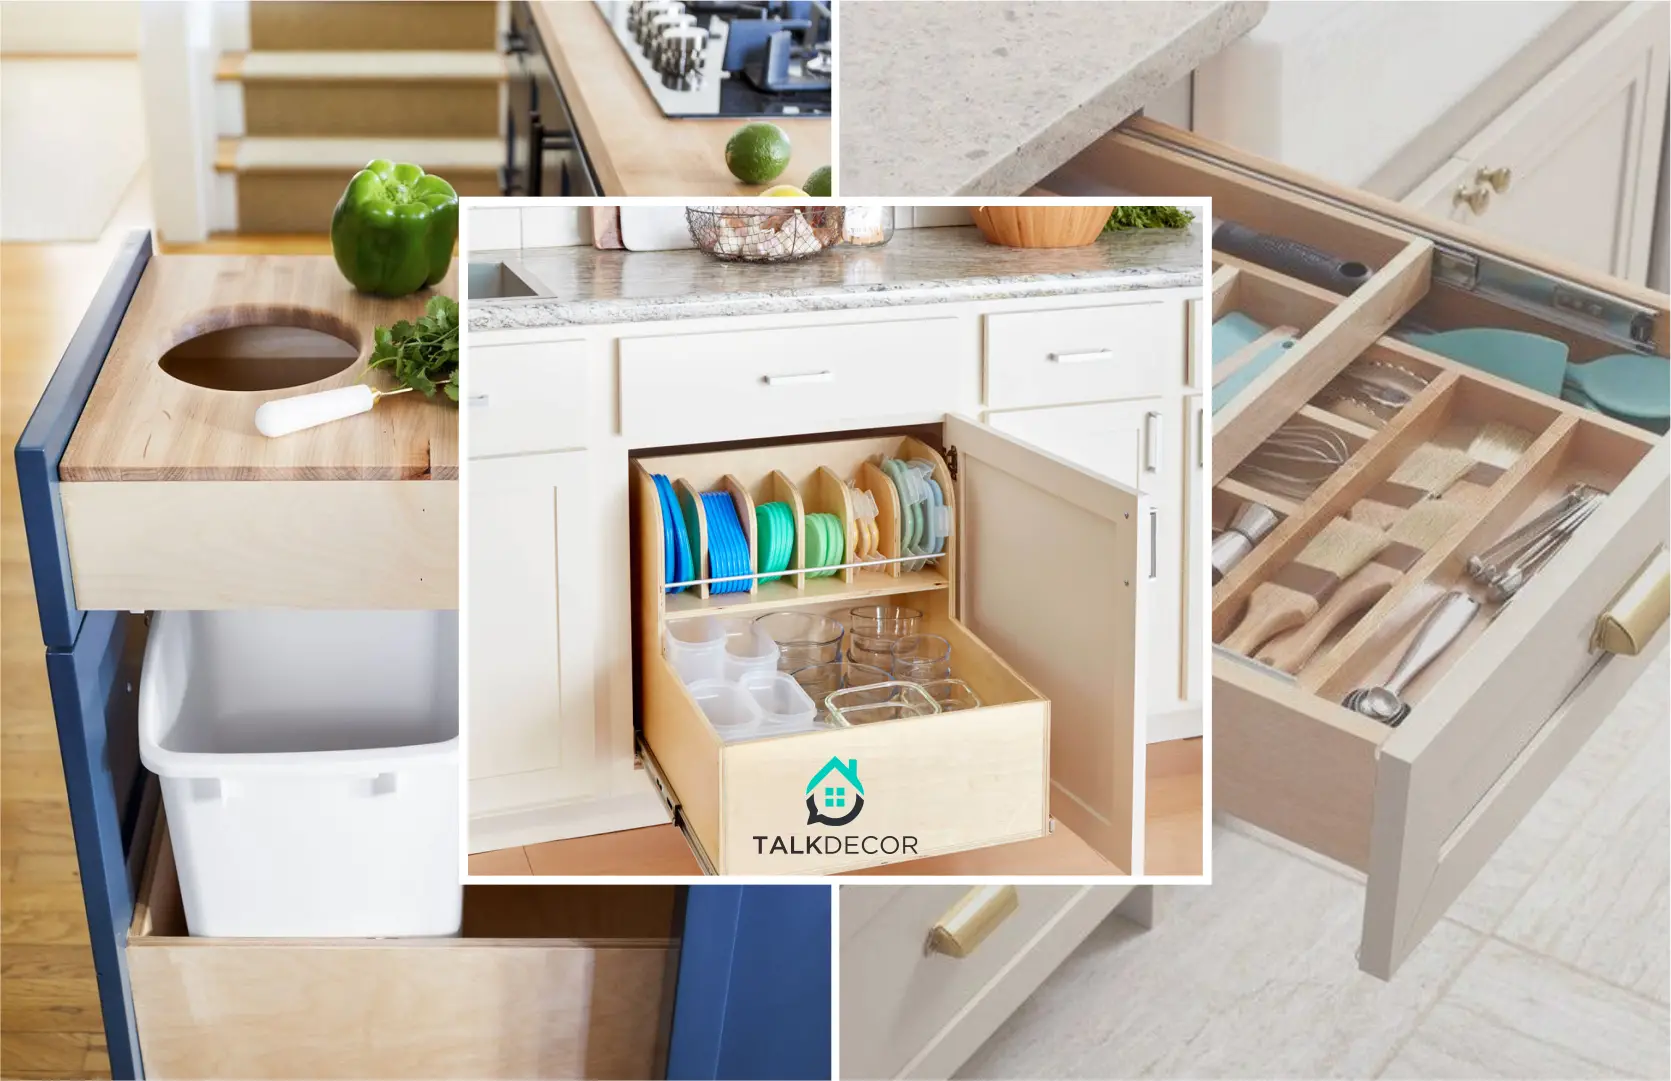 5 Tips for Your Kitchen Organization